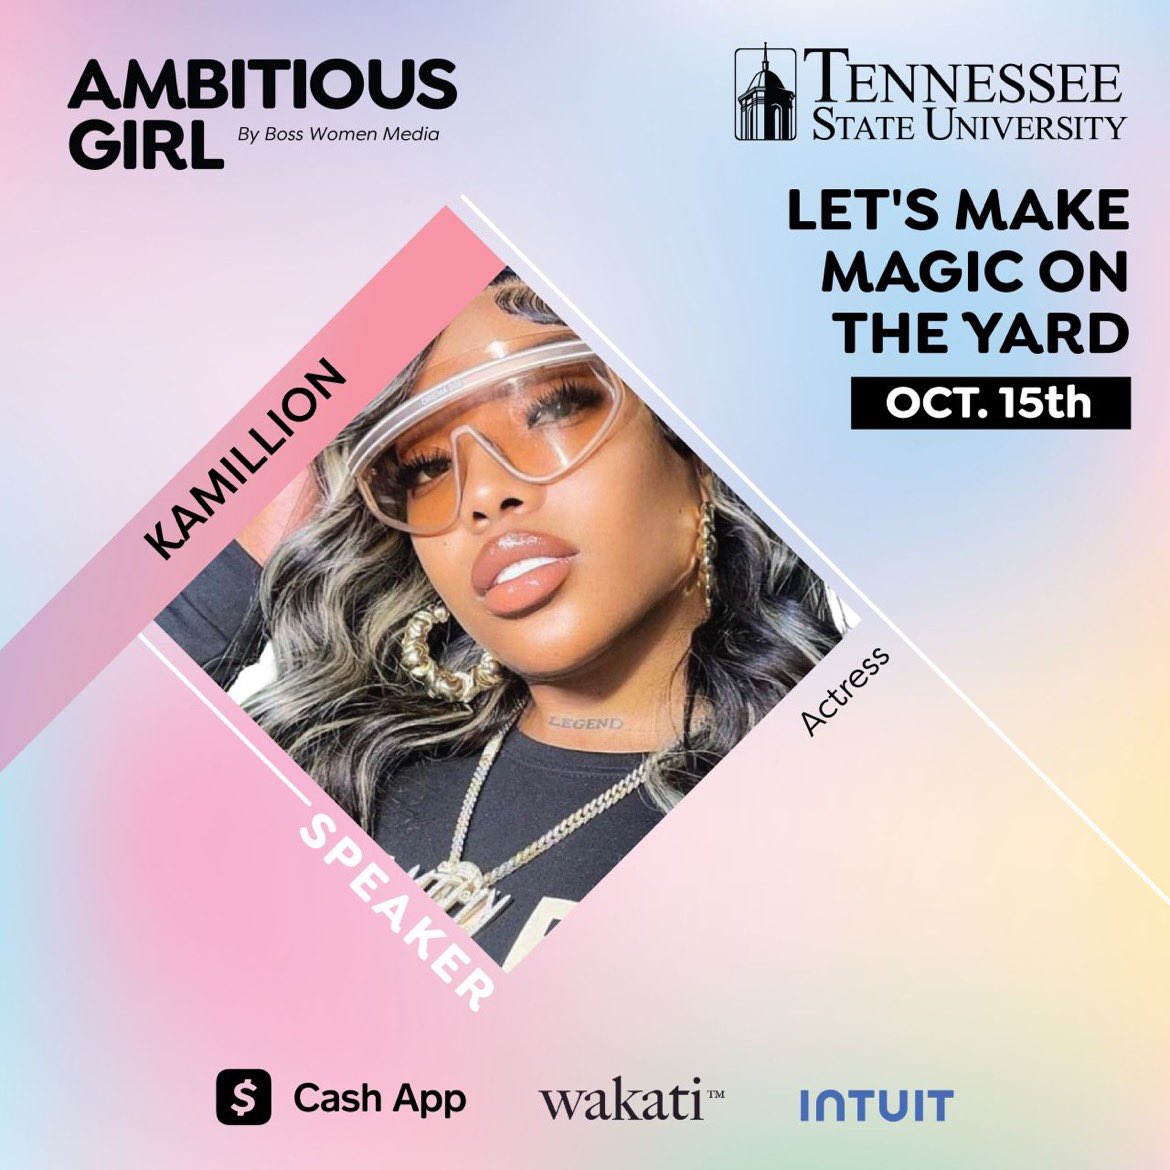 We're excited to have talented @itsKaMillion from the new hit show Rap Sh!t on @HBOmax as our keynote speaker at @TSUedu for the last stop of the #AmbitiousGirl HBCU Tour! REGISTER NOW at the link in our bio to attend this amazing FREE event✨Can’t wait to see you there!💕